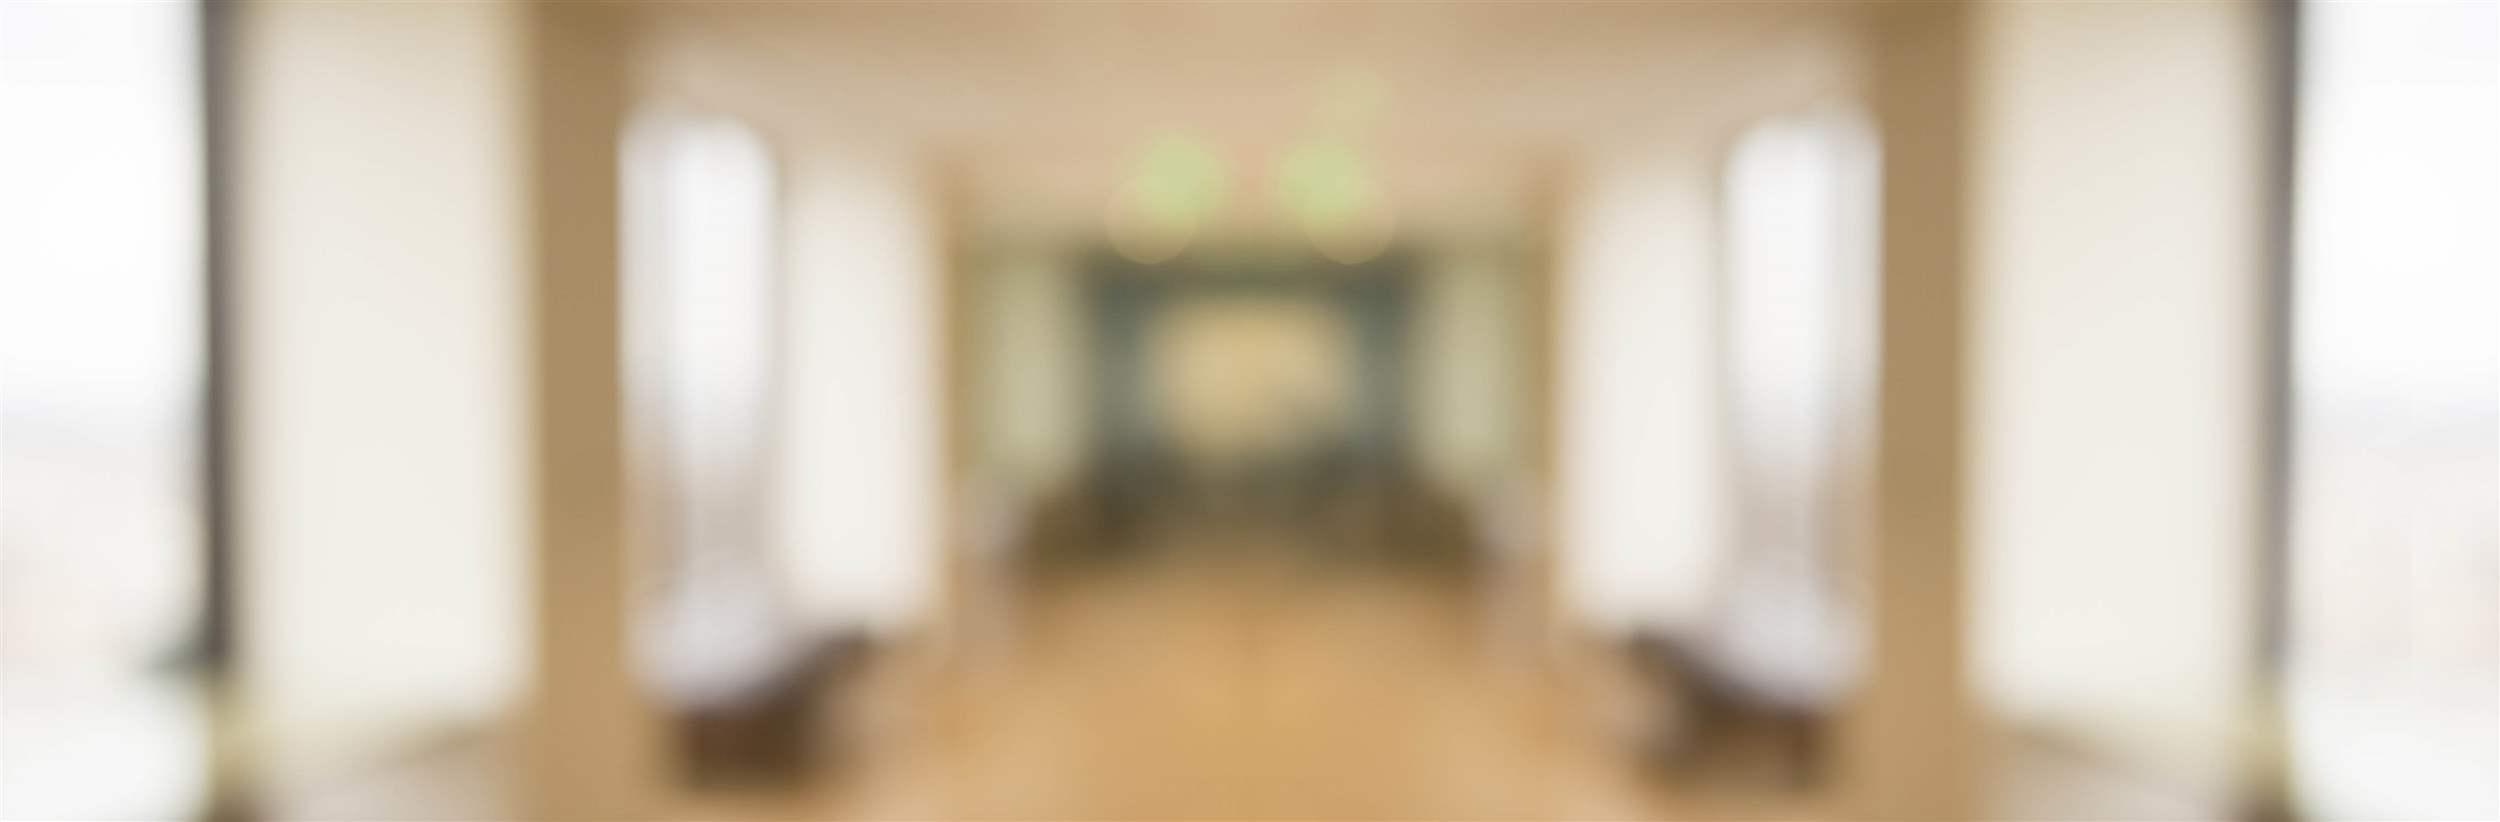 A blurry panoramic photograph of an office corridor with overhead lighting